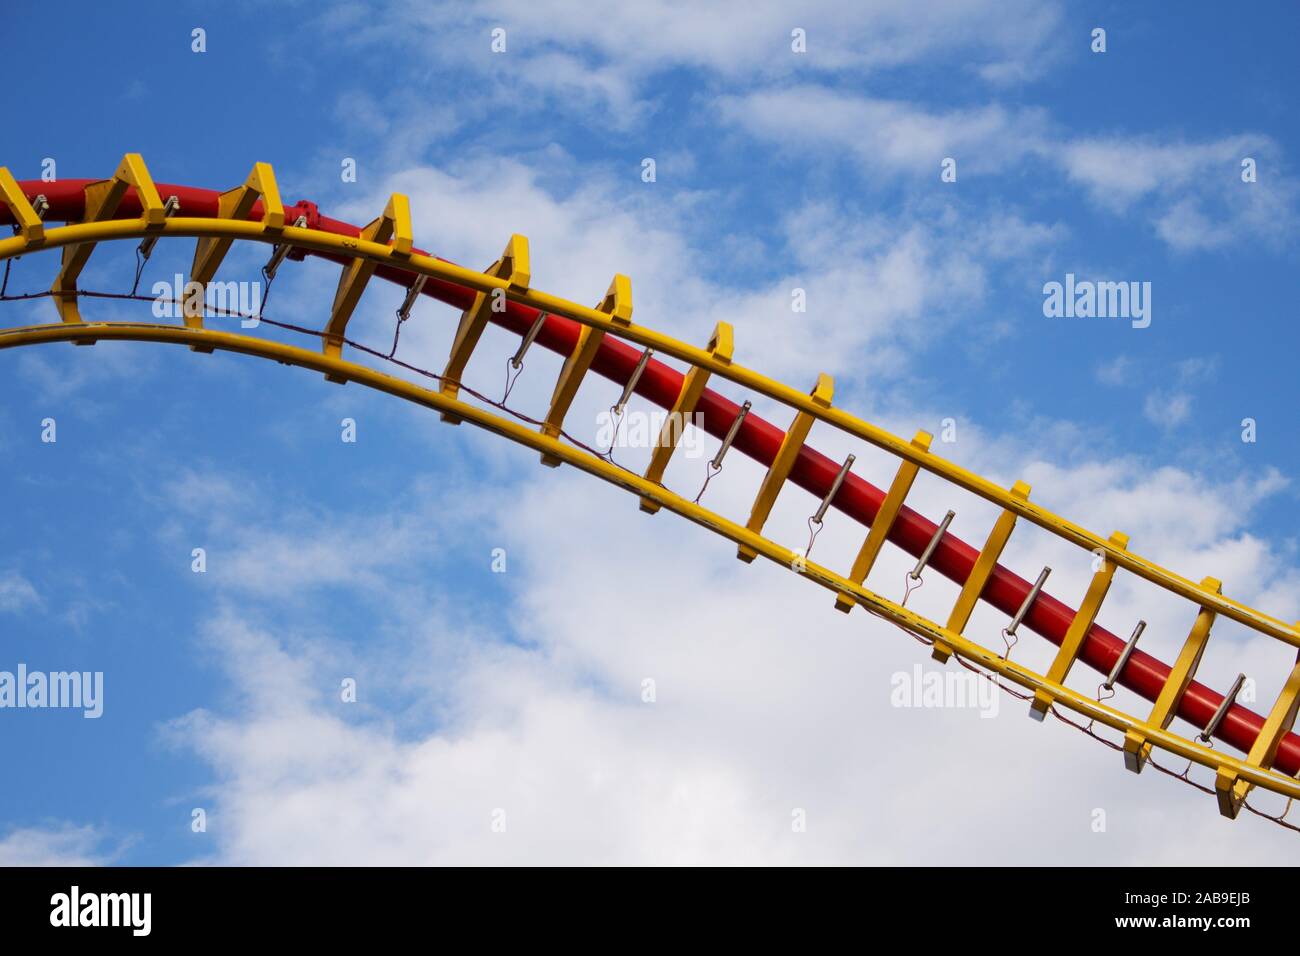 Roller Coaster Ride in Amusement Park. Entertainment and Adventure. Stock Photo